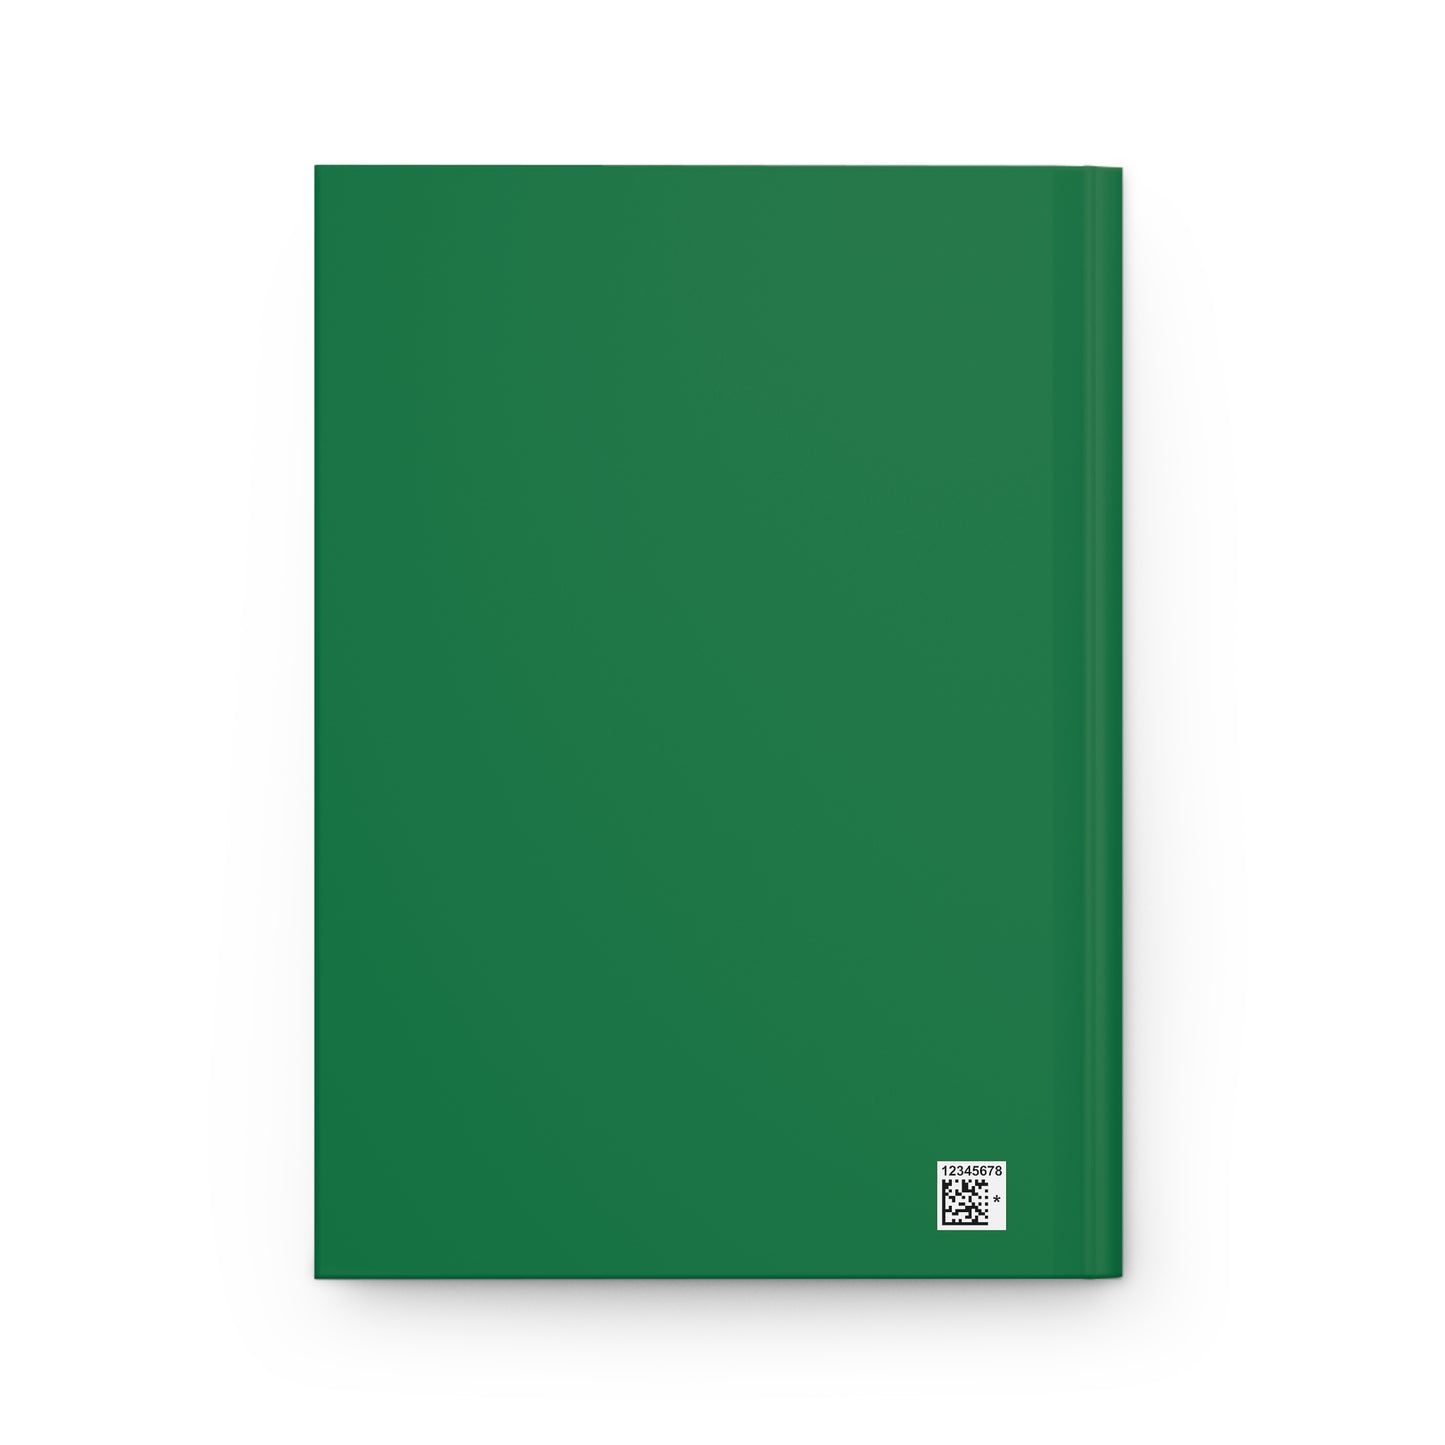 Beyond Lucky - Divinely Guided: St. Patrick's Day Inspired Matte Hardcover Journal, Joyous Life Journals